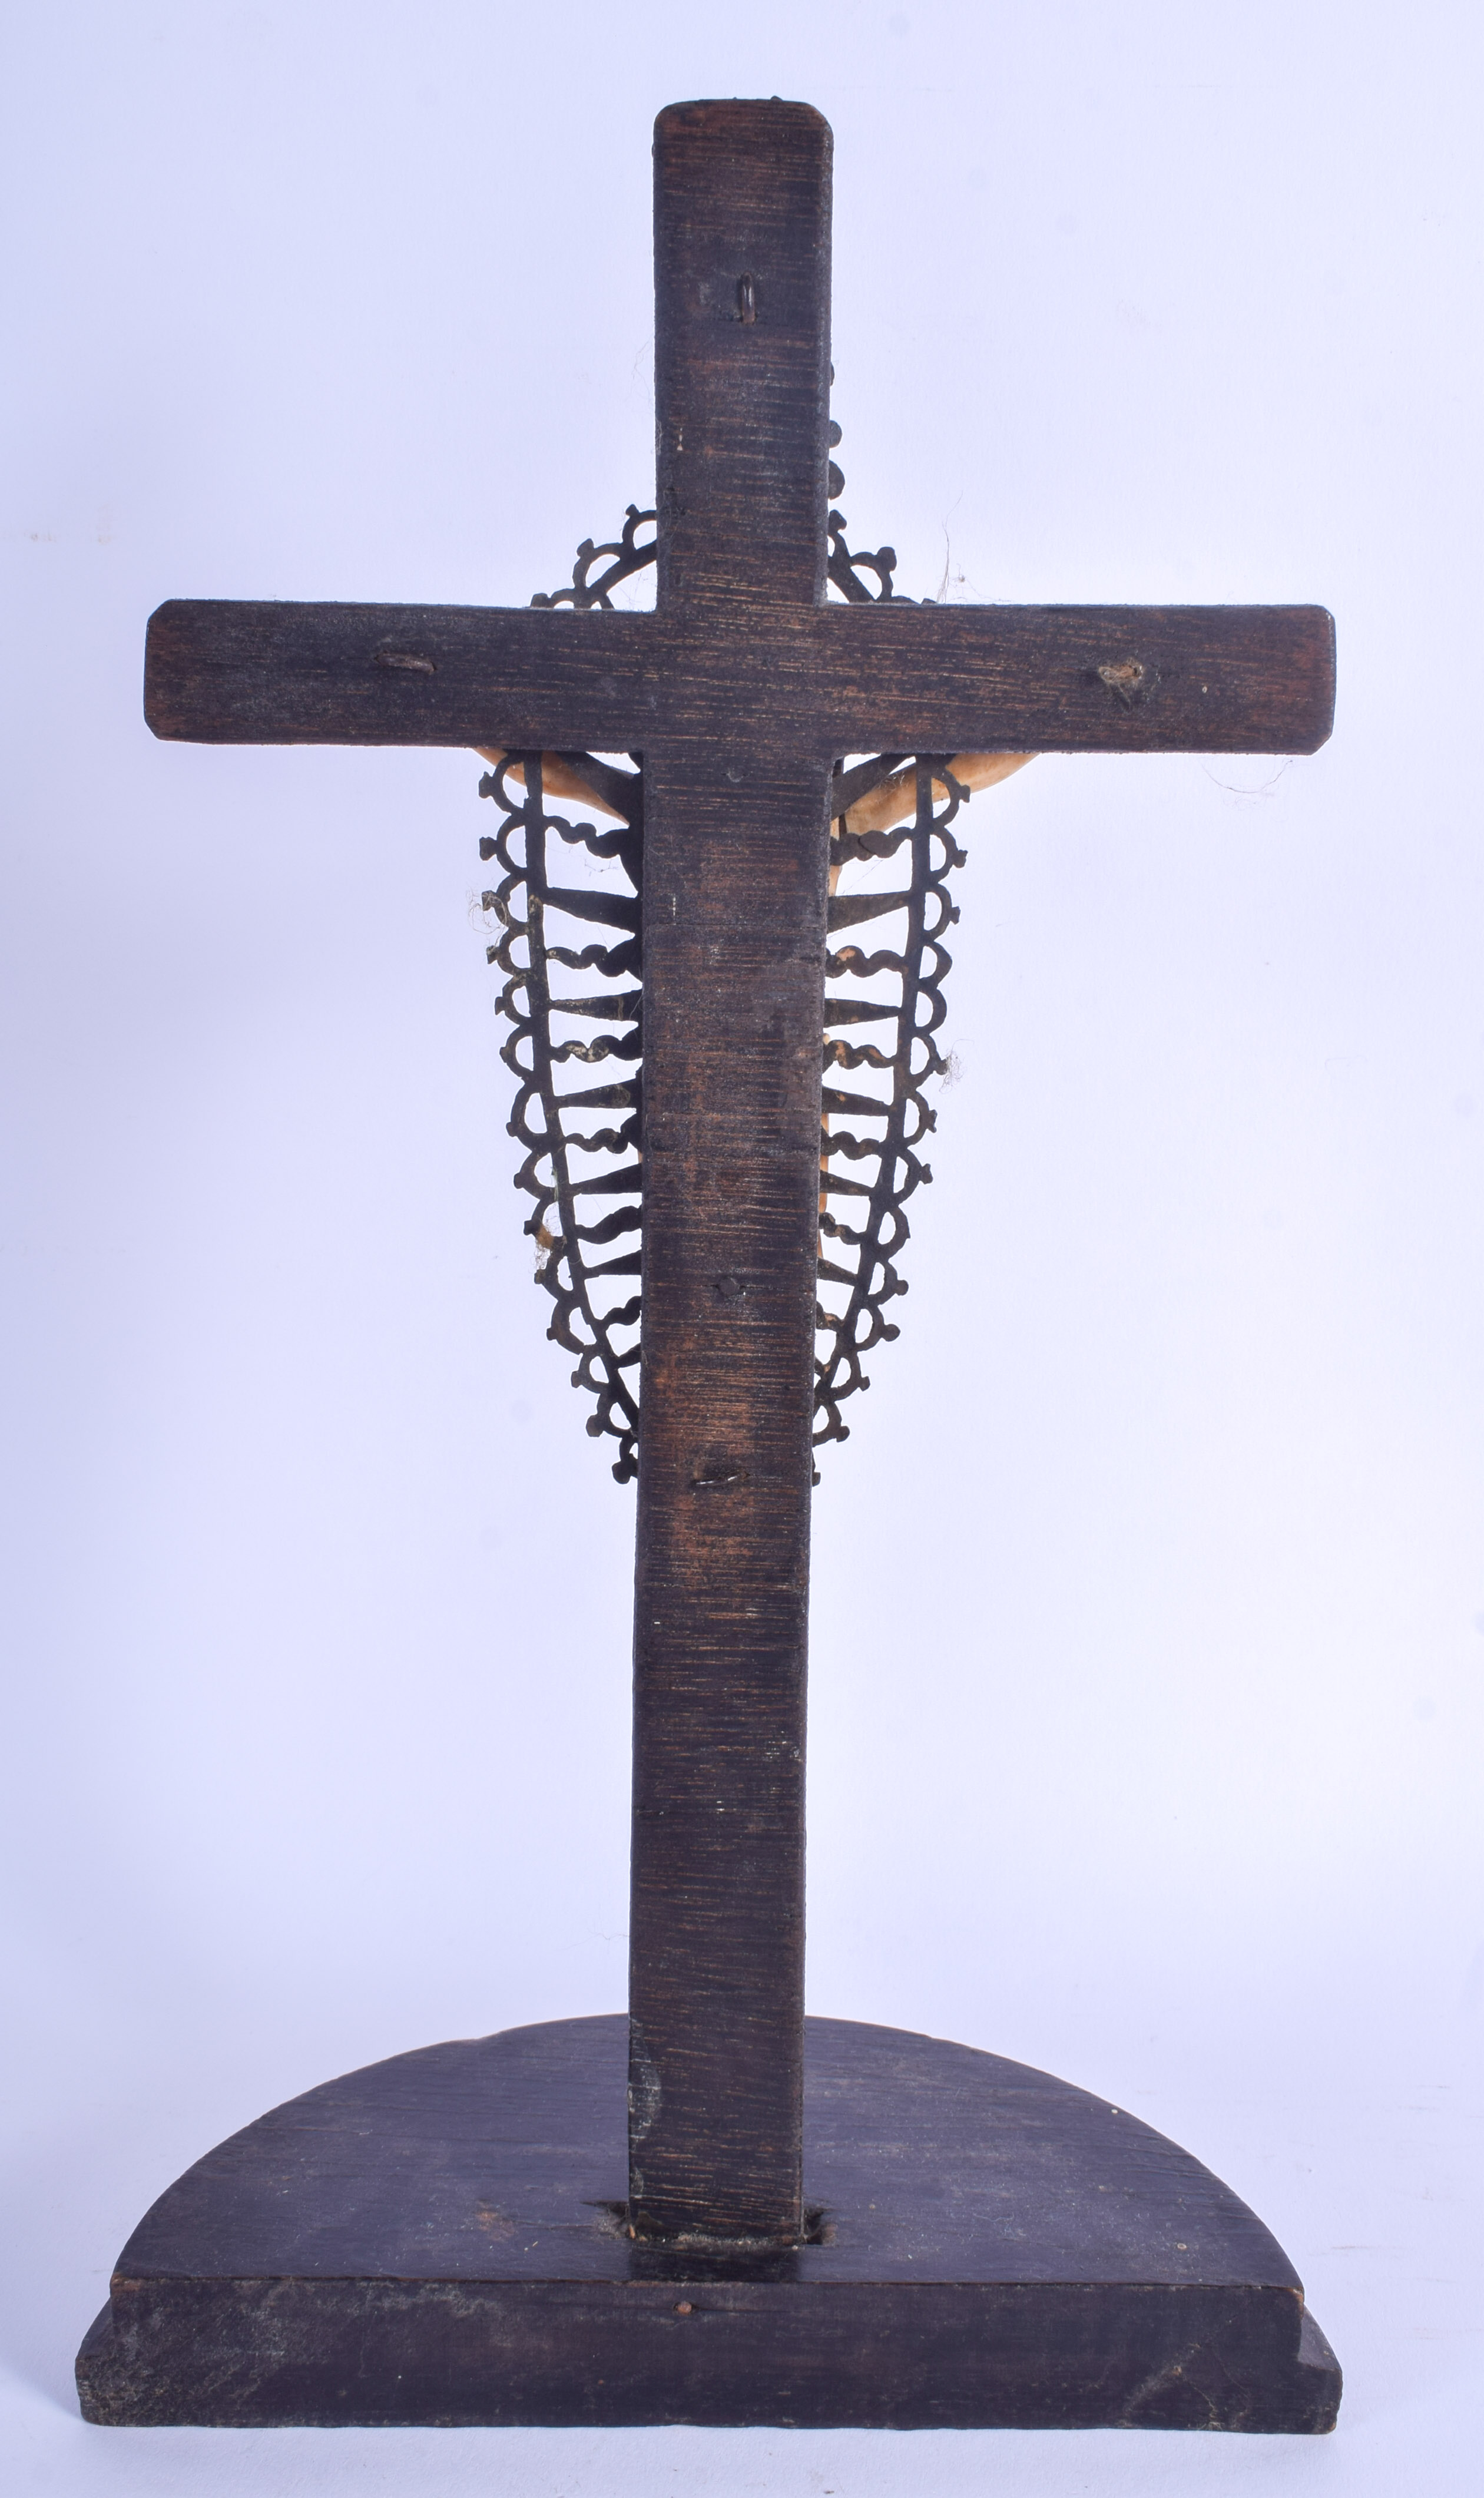 AN 18TH CENTURY INDO PORTUGUESE CARVED IVORY CRUCIFIX modelled upon the cross. Ivory 13 cm x 11 cm. - Image 3 of 3